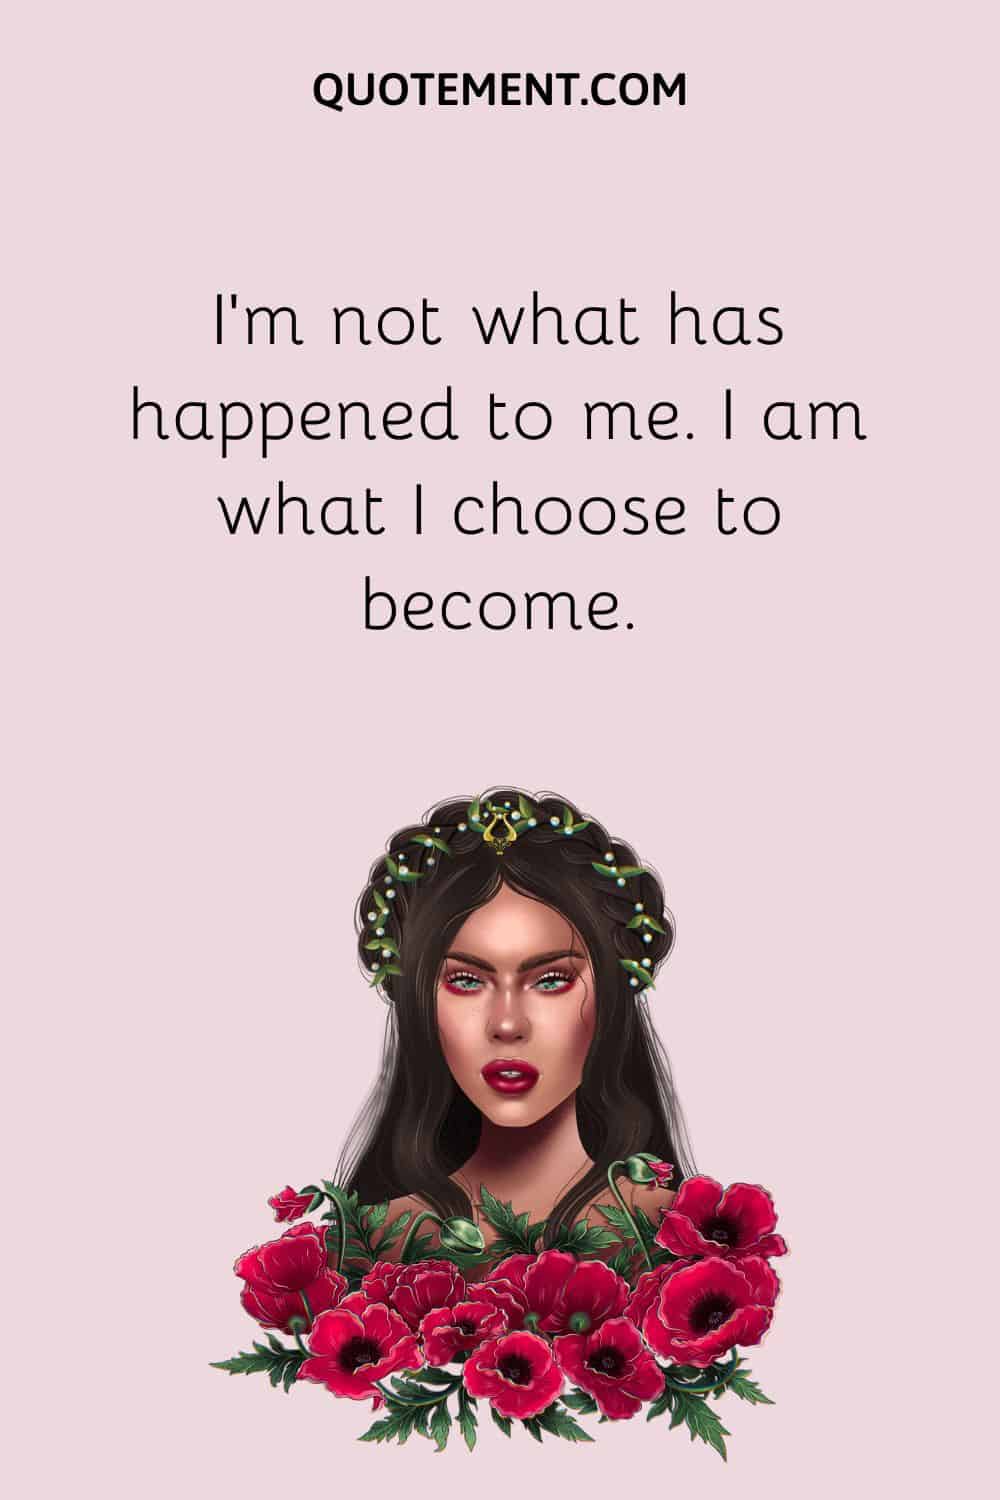  I’m not what has happened to me